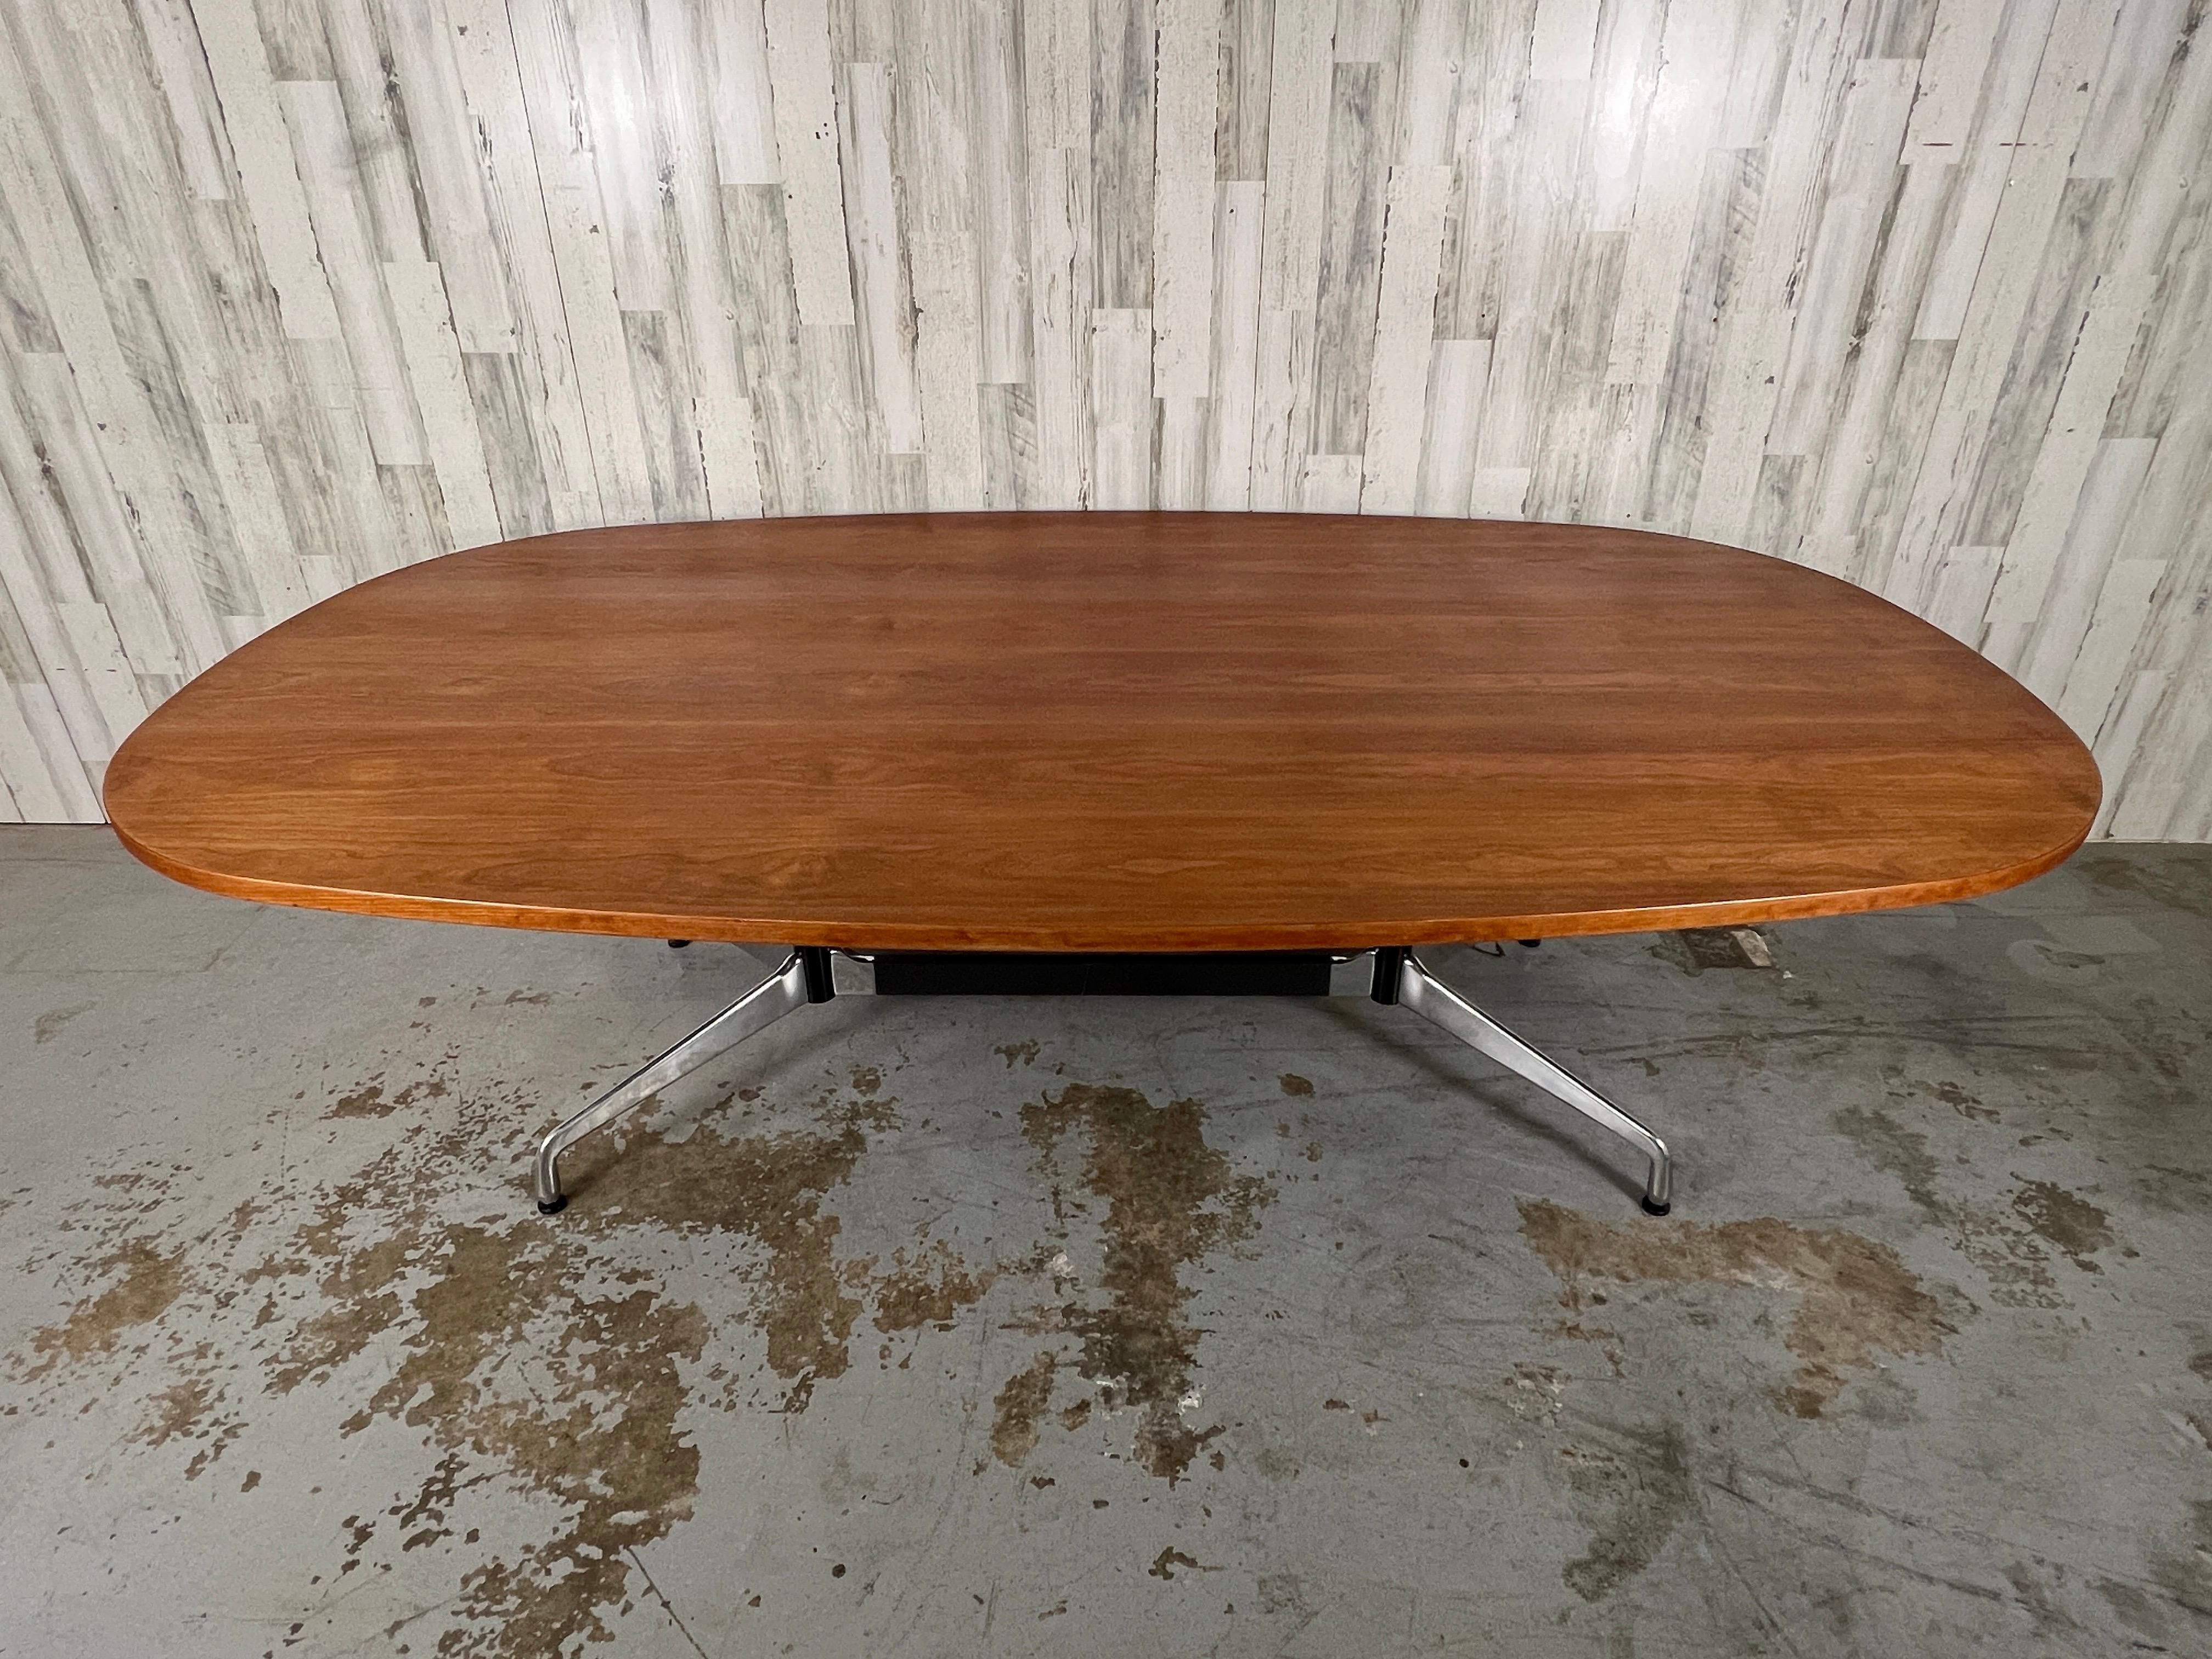 Classic Eames design for Herman Miller conference / dining table, walnut top with cast aluminum base make this iconic table usable ant home as well as the office.


Dimensions: Height: 28.5 in (72.39 cm)Width: 96 in (243.84 cm)Depth: 53 in (134.62